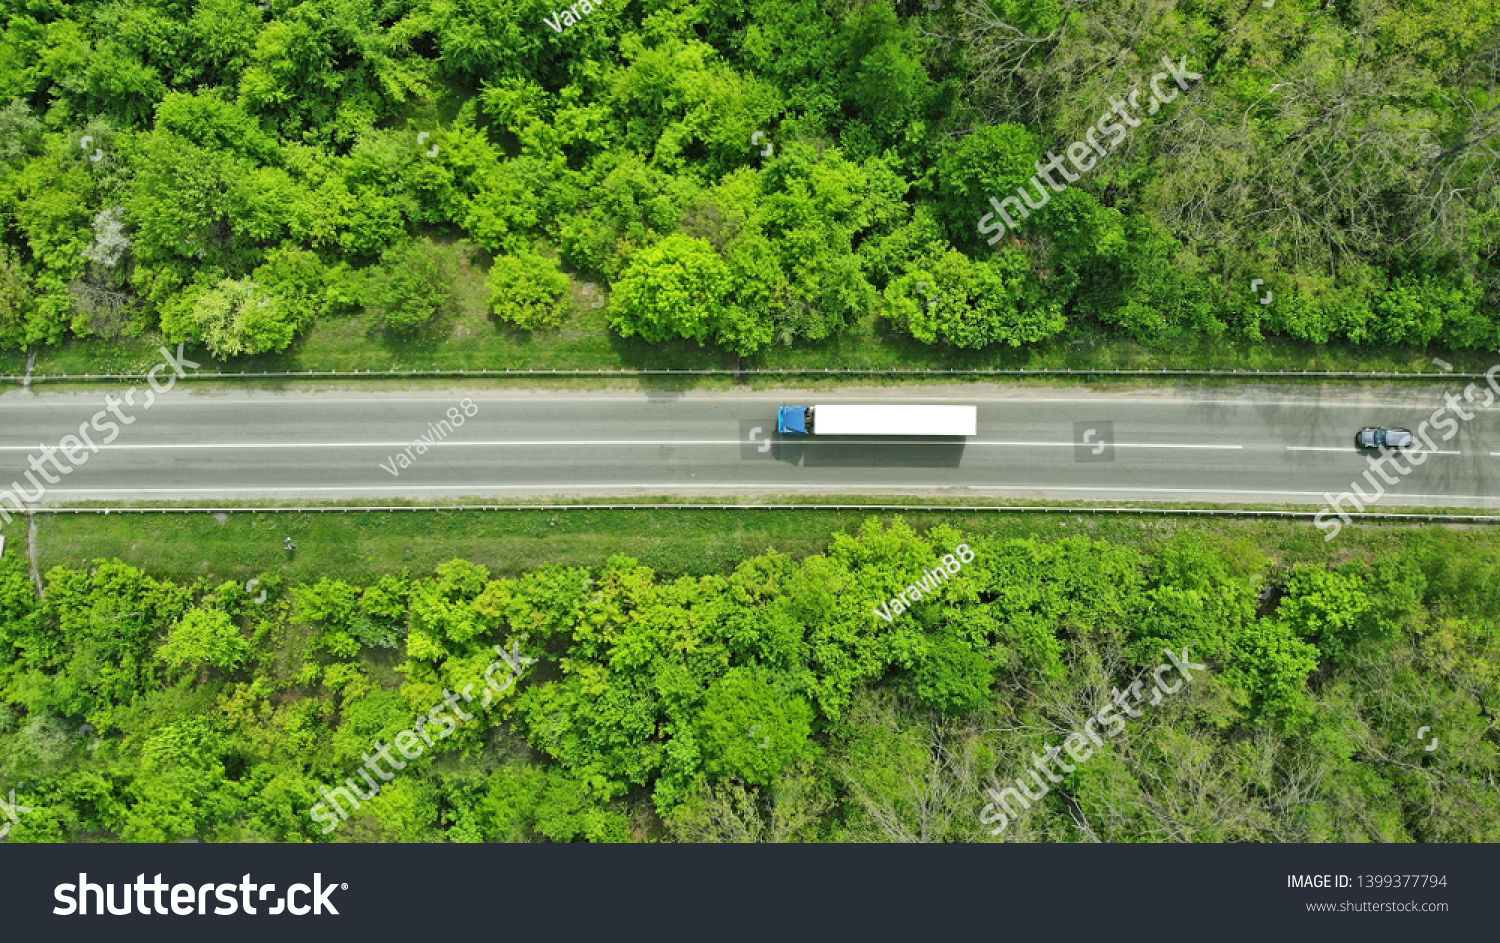 Wagon driving on the highway, aerial. Transport logistics background top view.  #1399377794